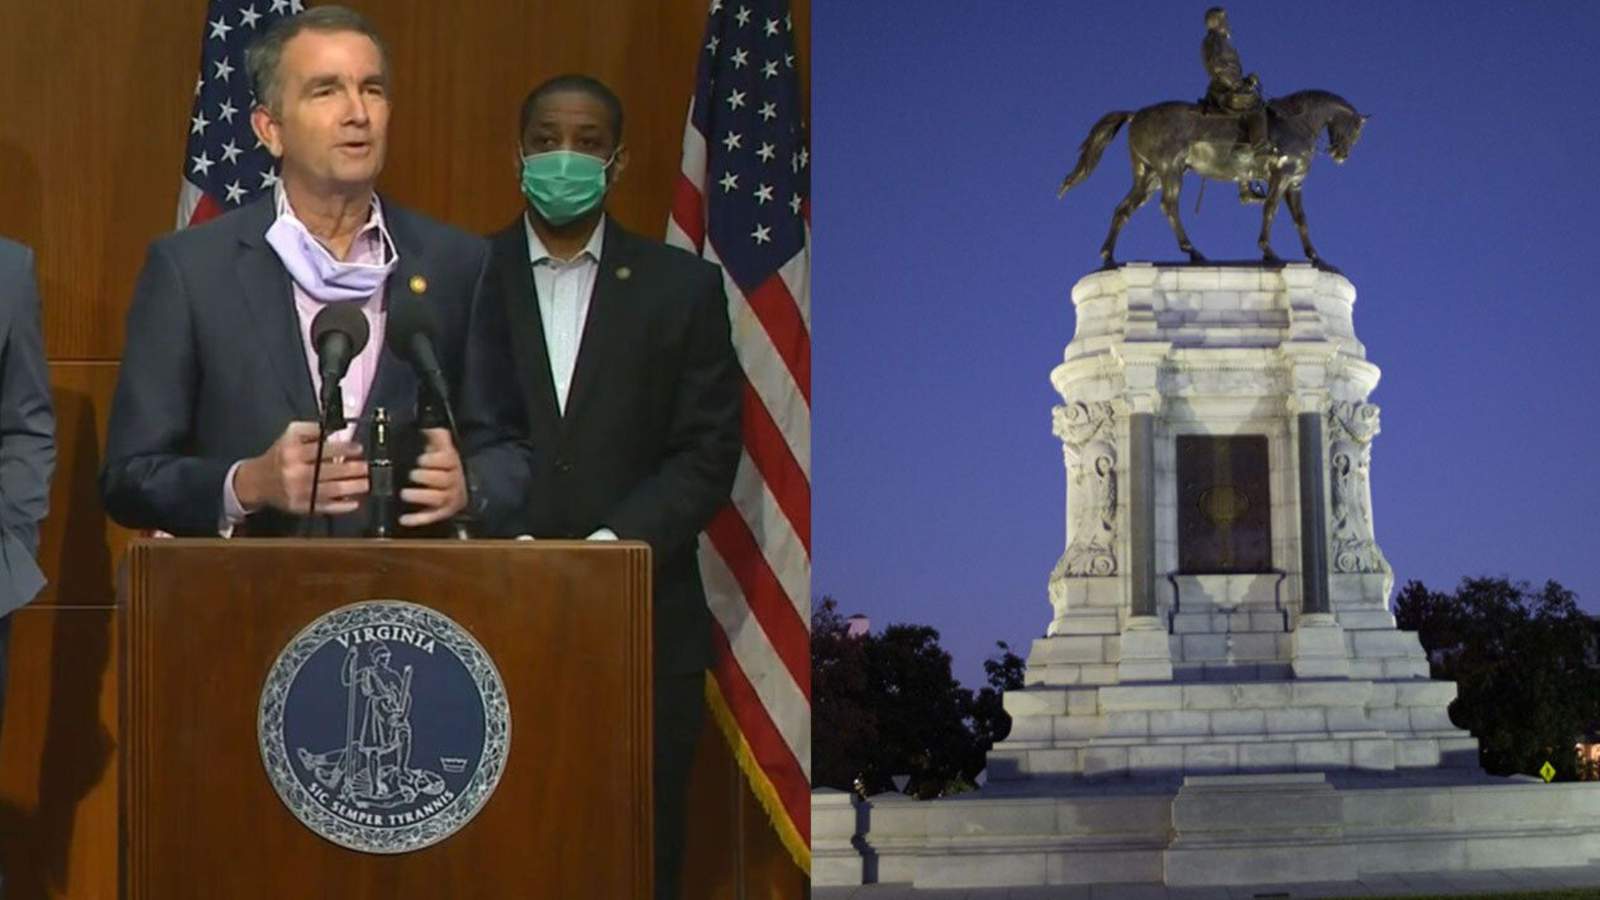 Gov. Northam to remove Richmond’s Robert E. Lee statue ‘as soon as possible’